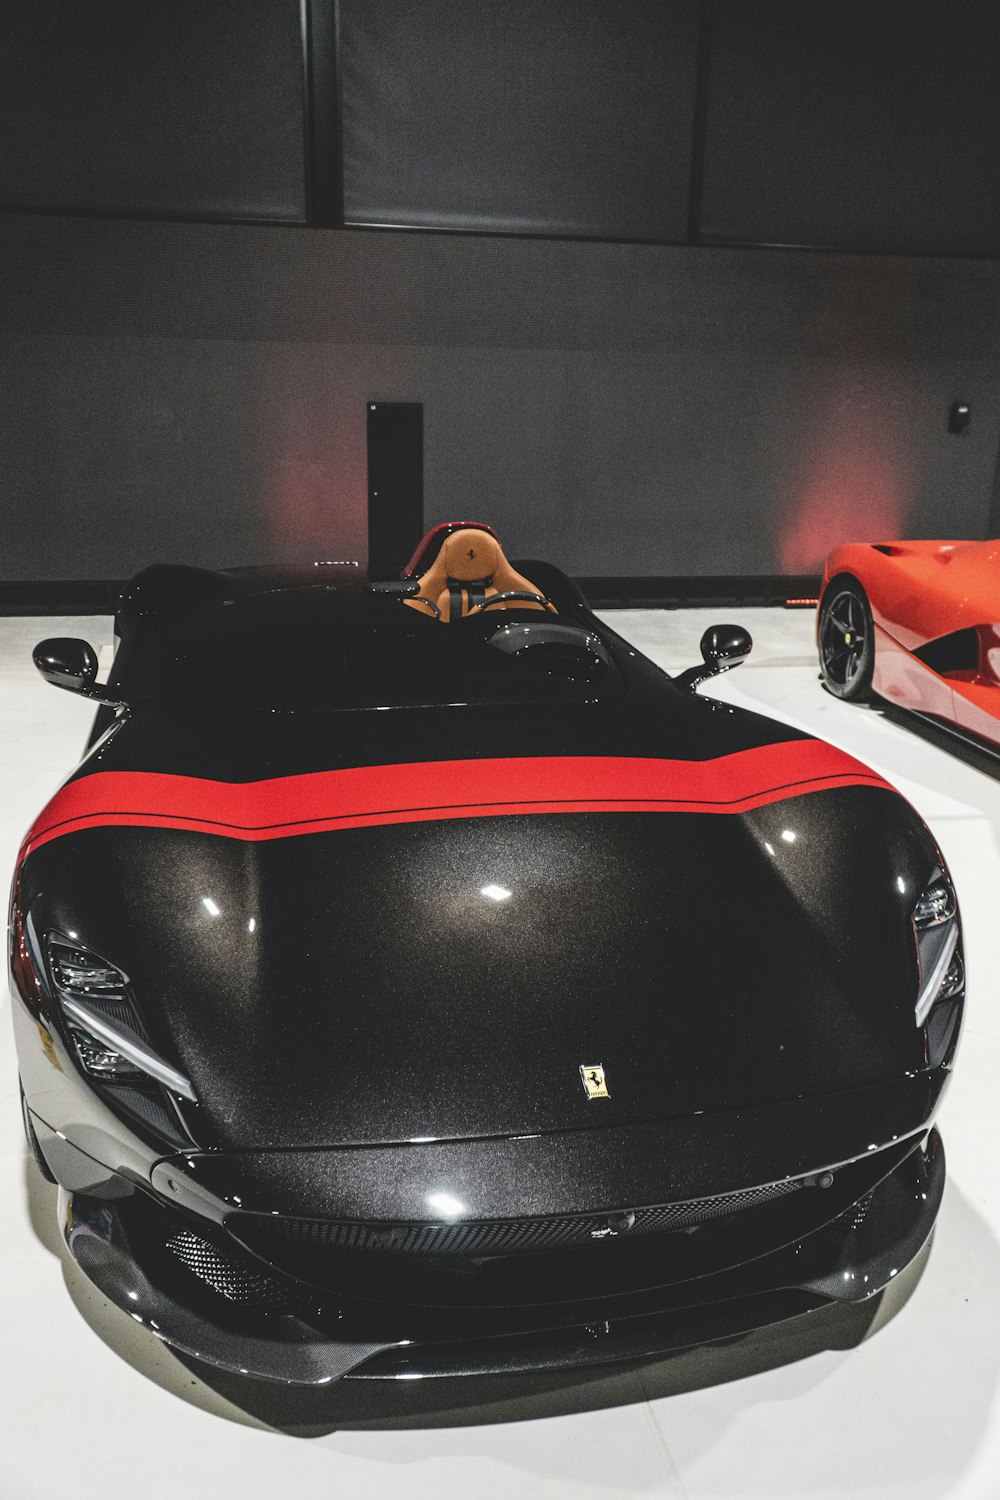 a black and red sports car is on display